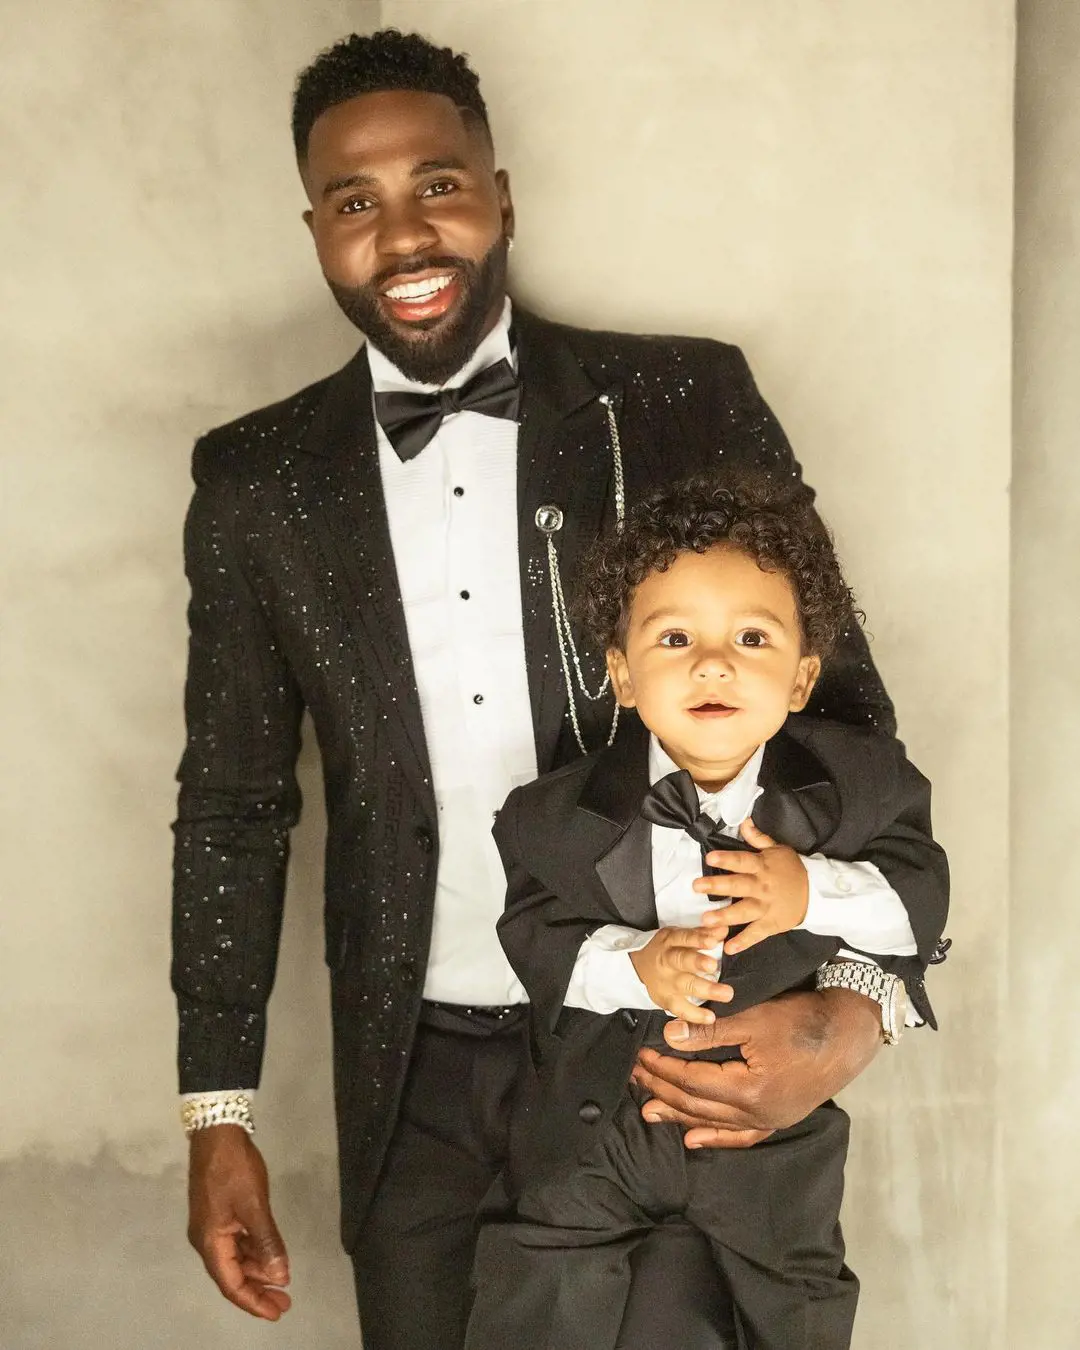 Jason with his one year old son Jason King Derulo co-ordinated in a suit and bow tie.